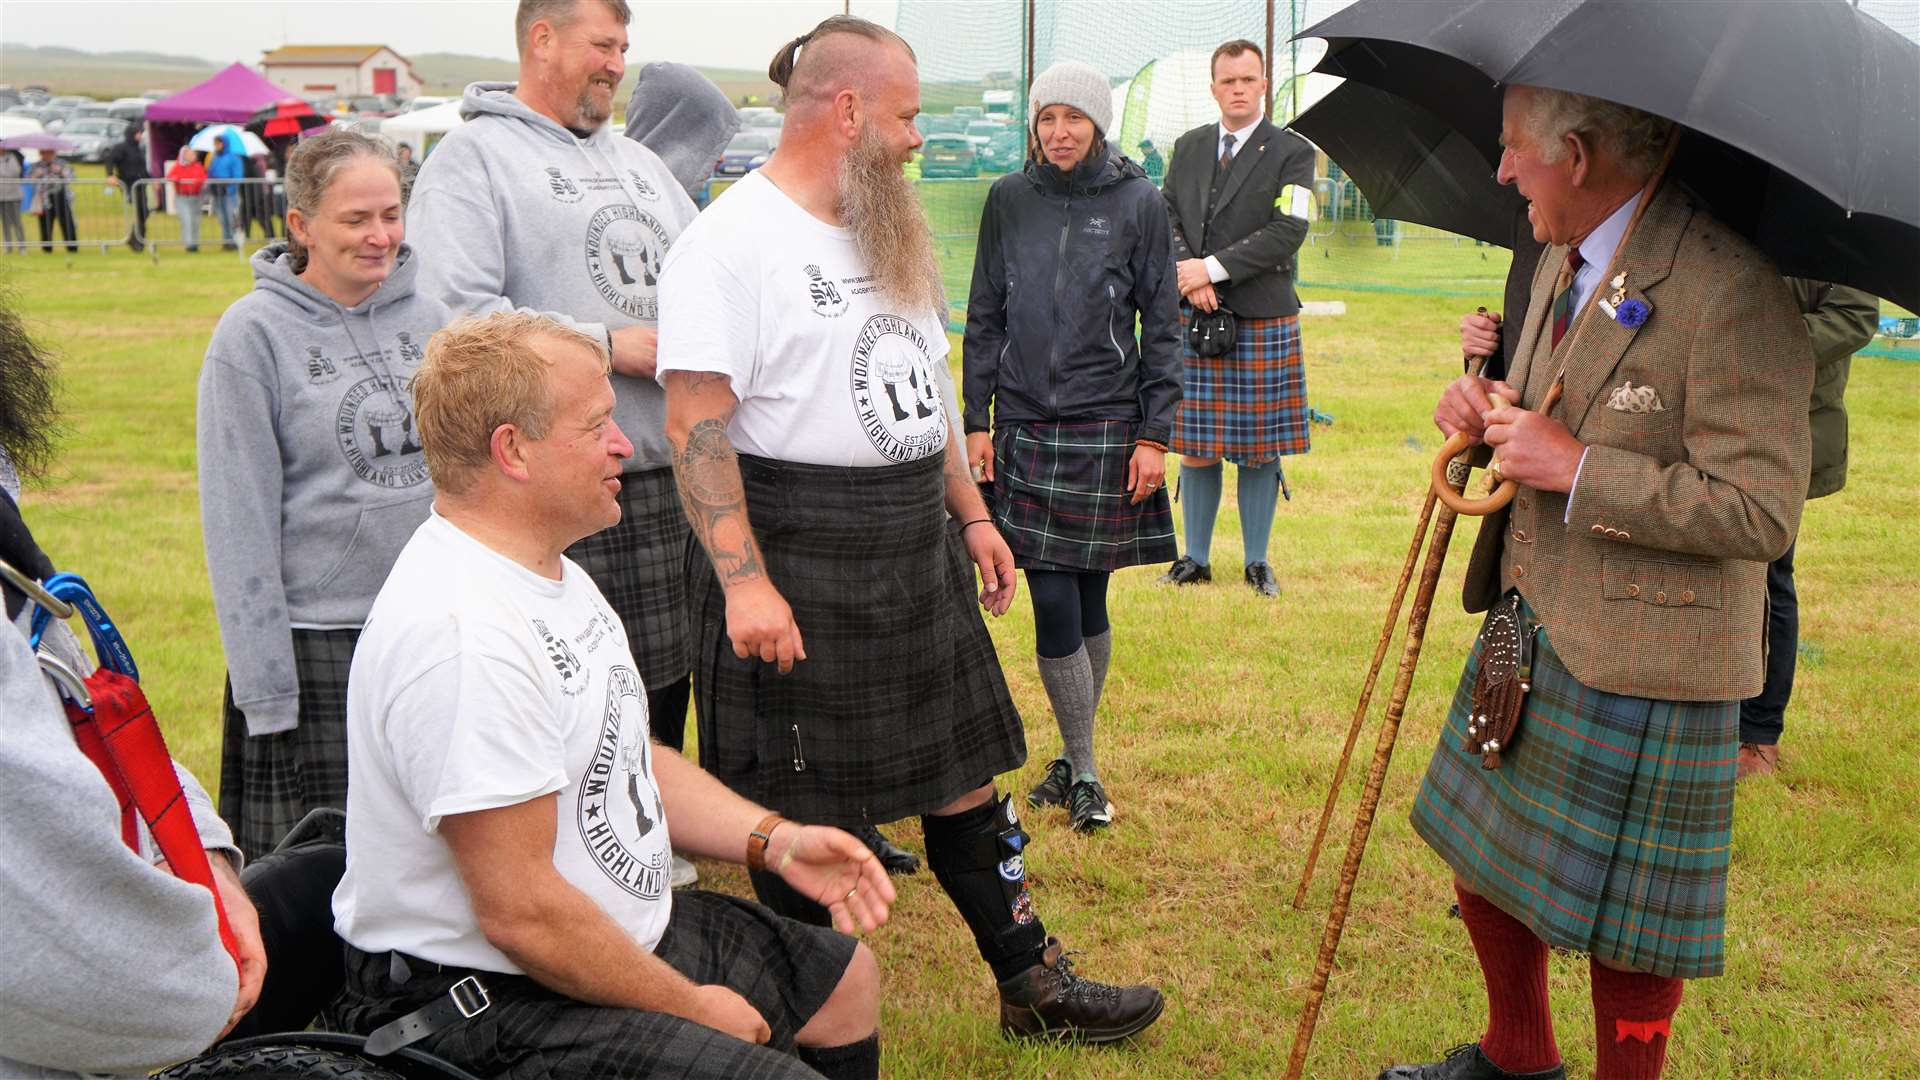 Prince Charles shares a joke with the Wounded Highlanders team. Picture: DGS